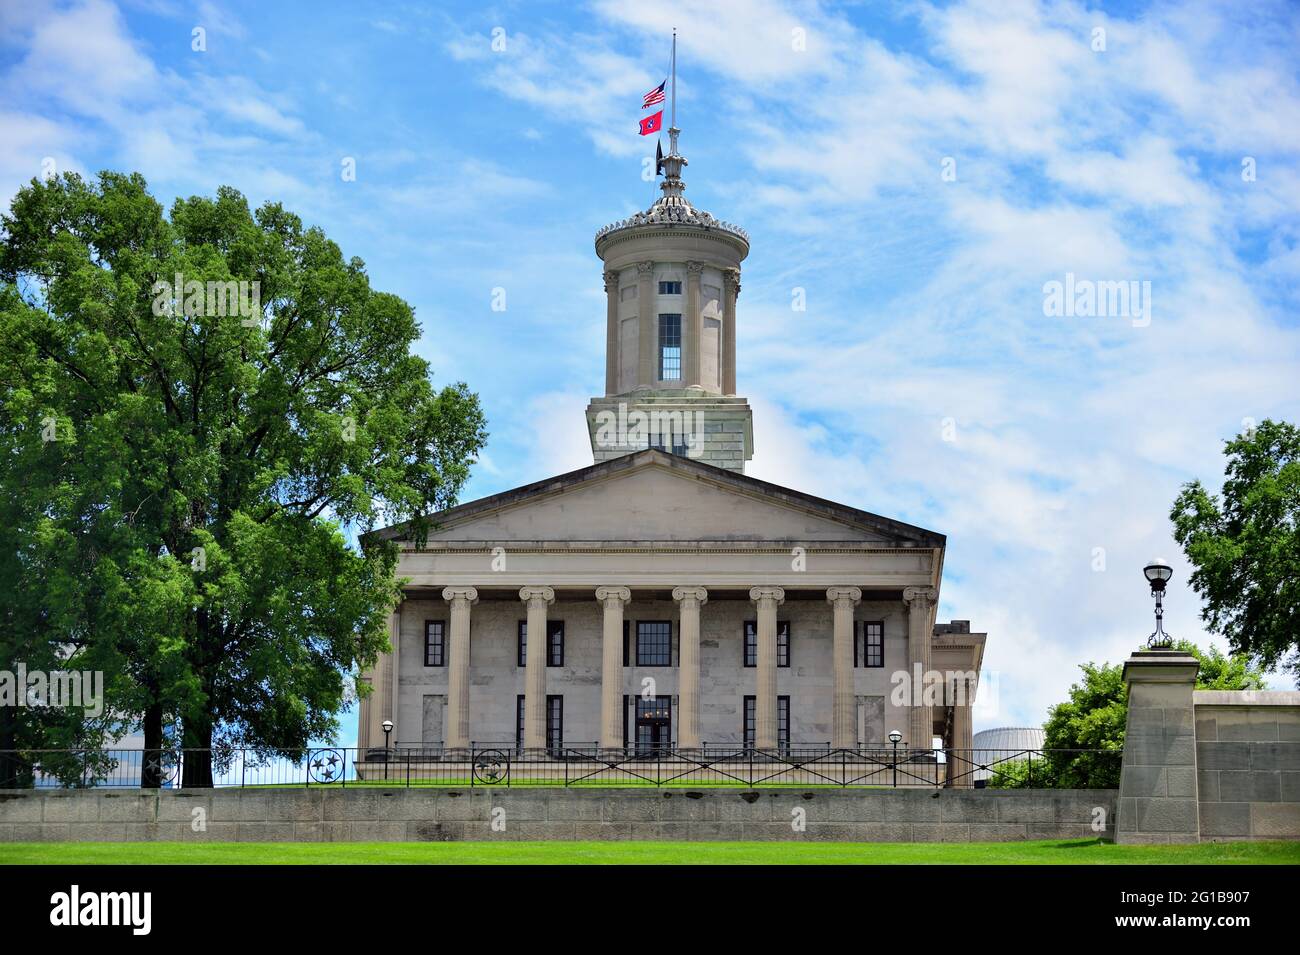 Nashville, Tennessee, USA. The Tennessee State Capitol Building was built between 1845 and 1859 and in Greek Revival style of architecture. Stock Photo